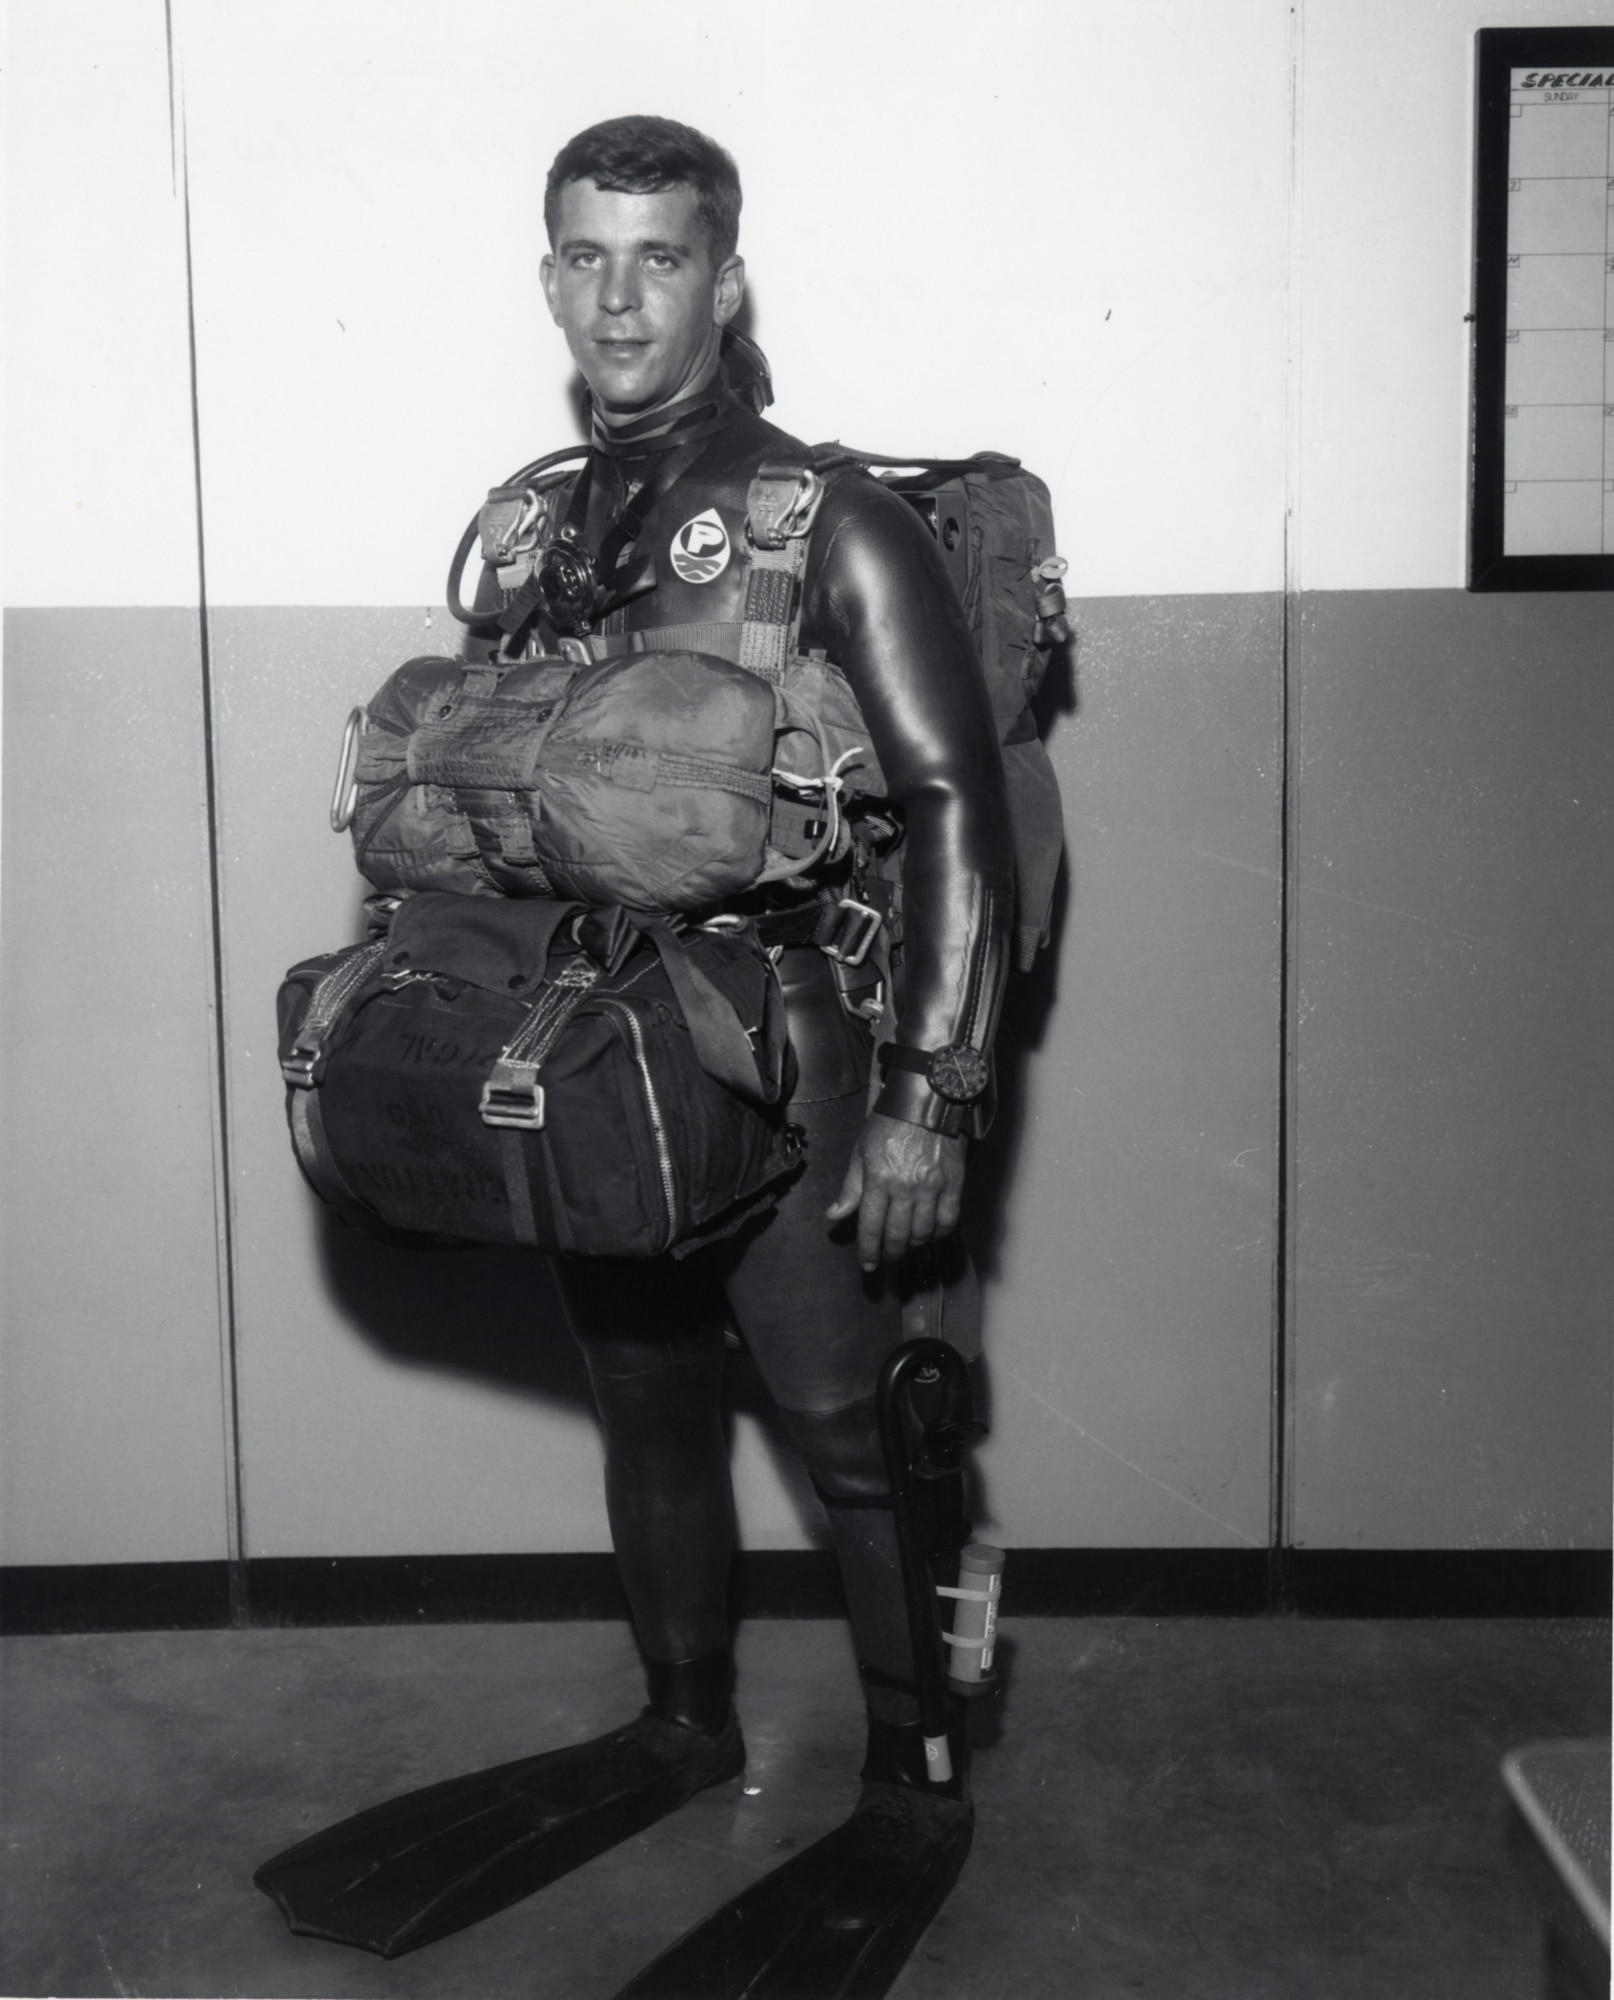 Pararescuemen are trained medical technicians with advanced military skills such as scuba and parachuting. Here, a PJ is shown wearing the standard equipment to perform a water parachute jump in 1970.